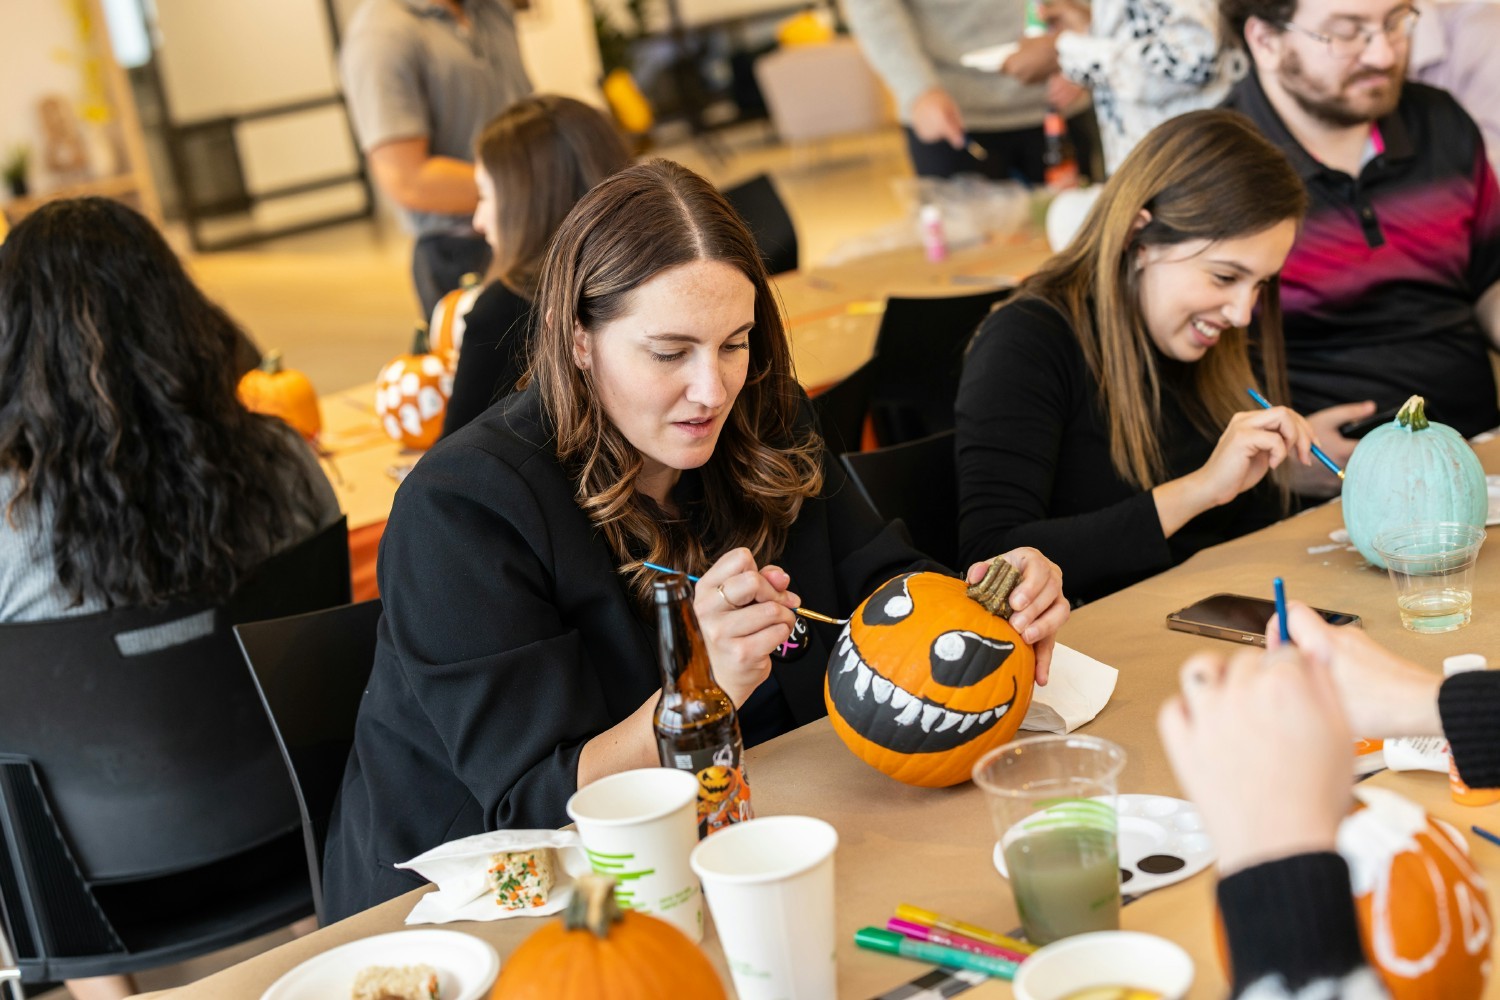 Colleagues displayed their creativity in our Pumpkinpalooza painting contest, which included cider and fall treats.